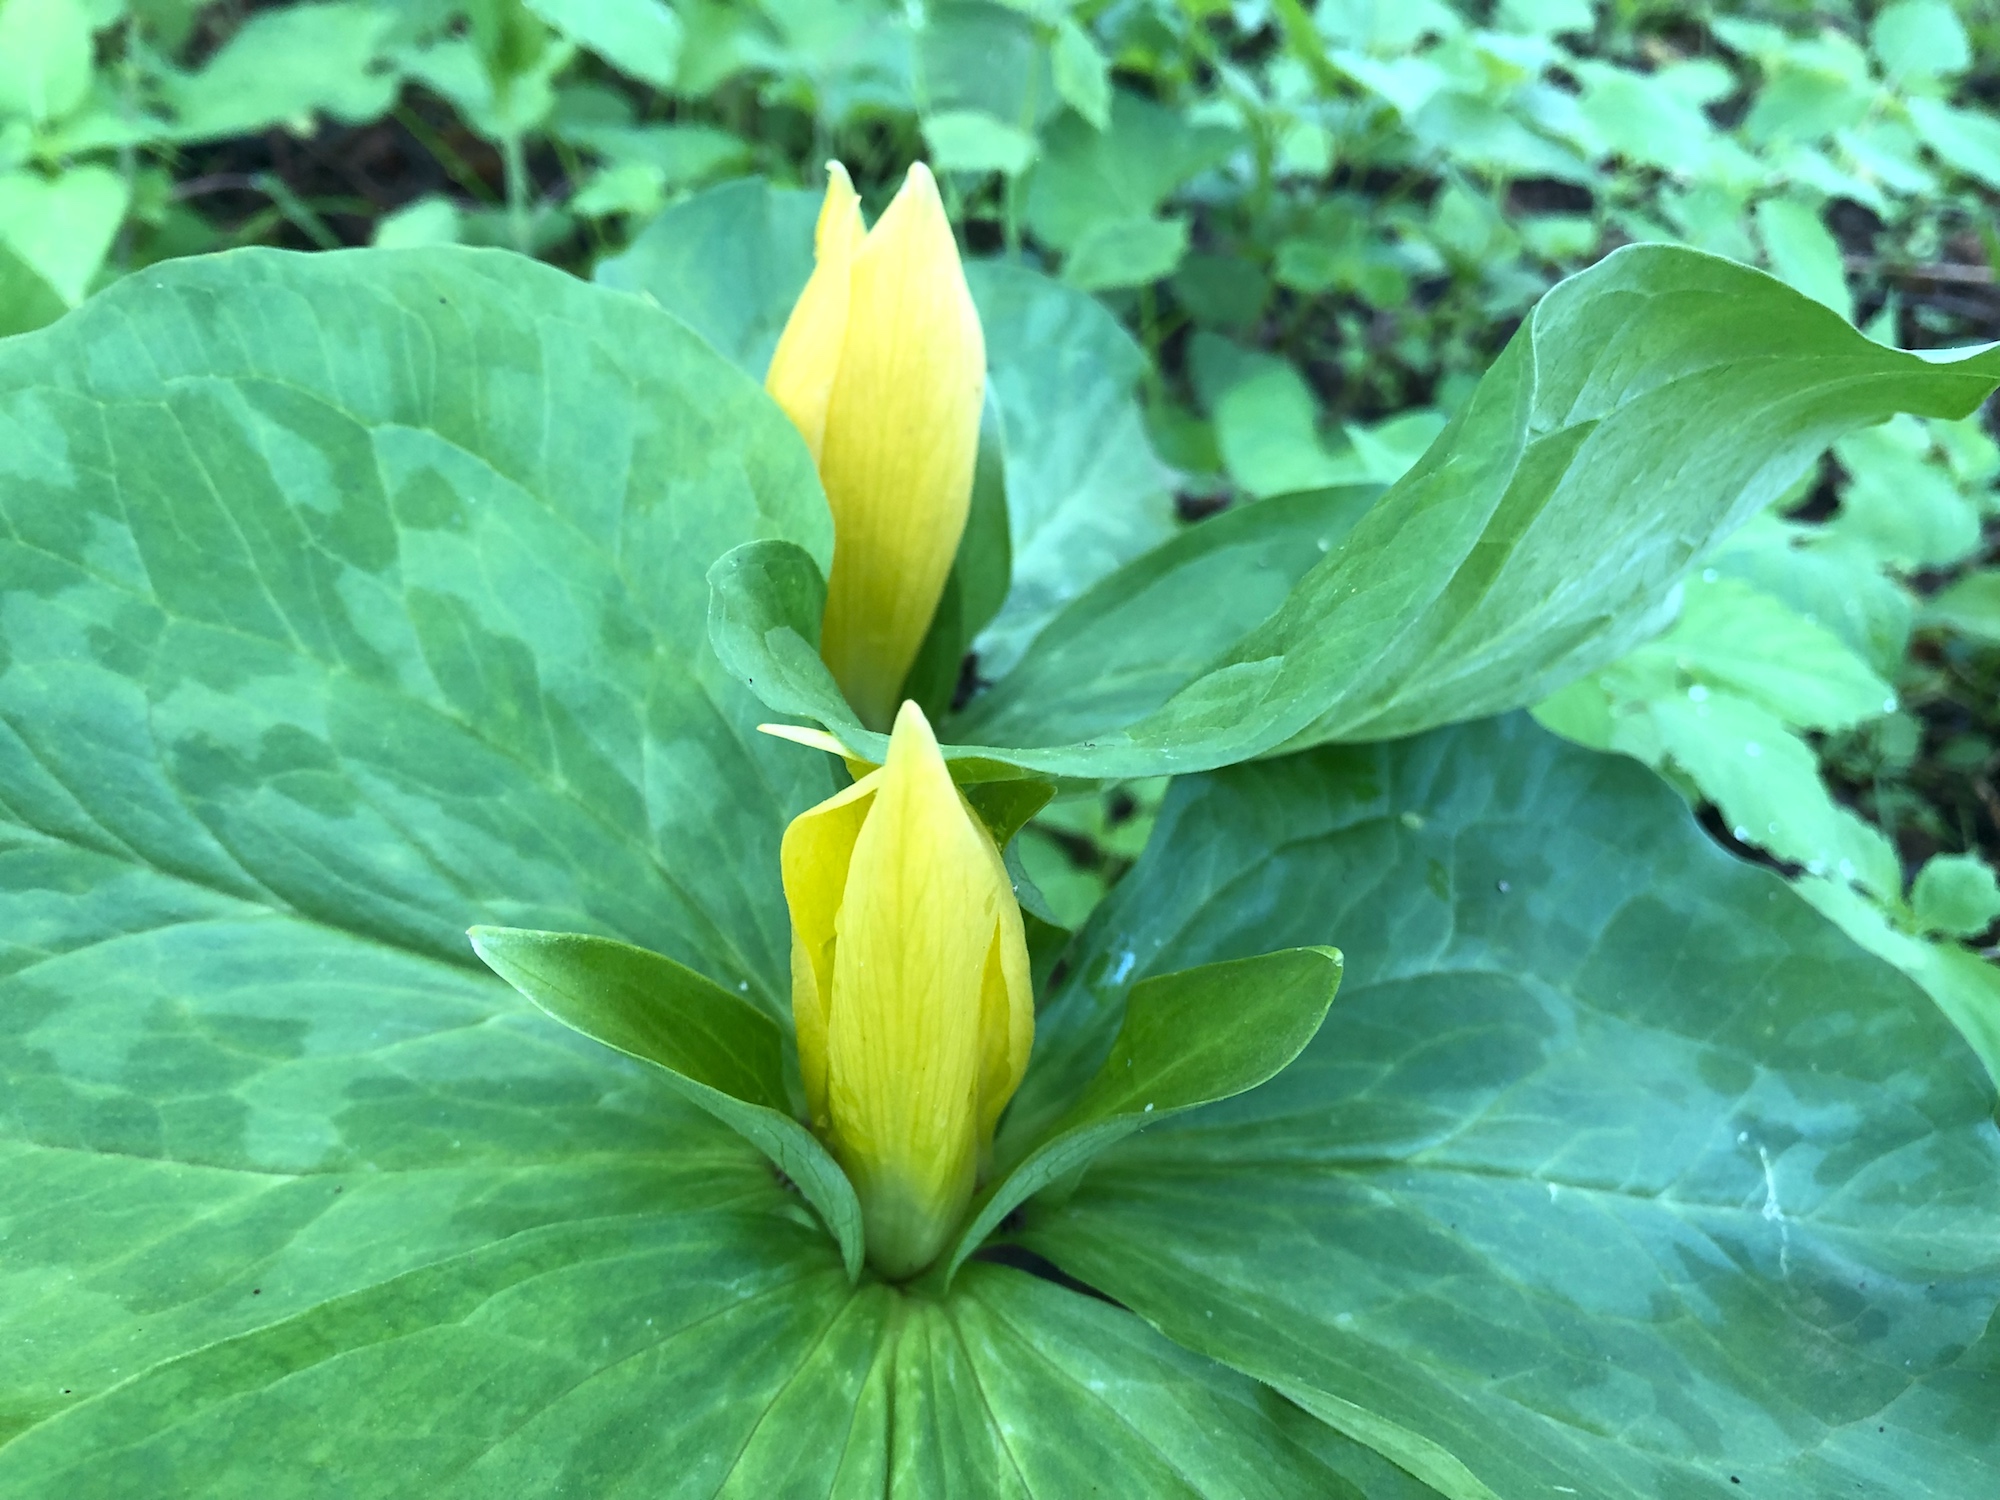 Trillium off of bike path between Marion Dunn and Duck Pond on June 2, 2019.